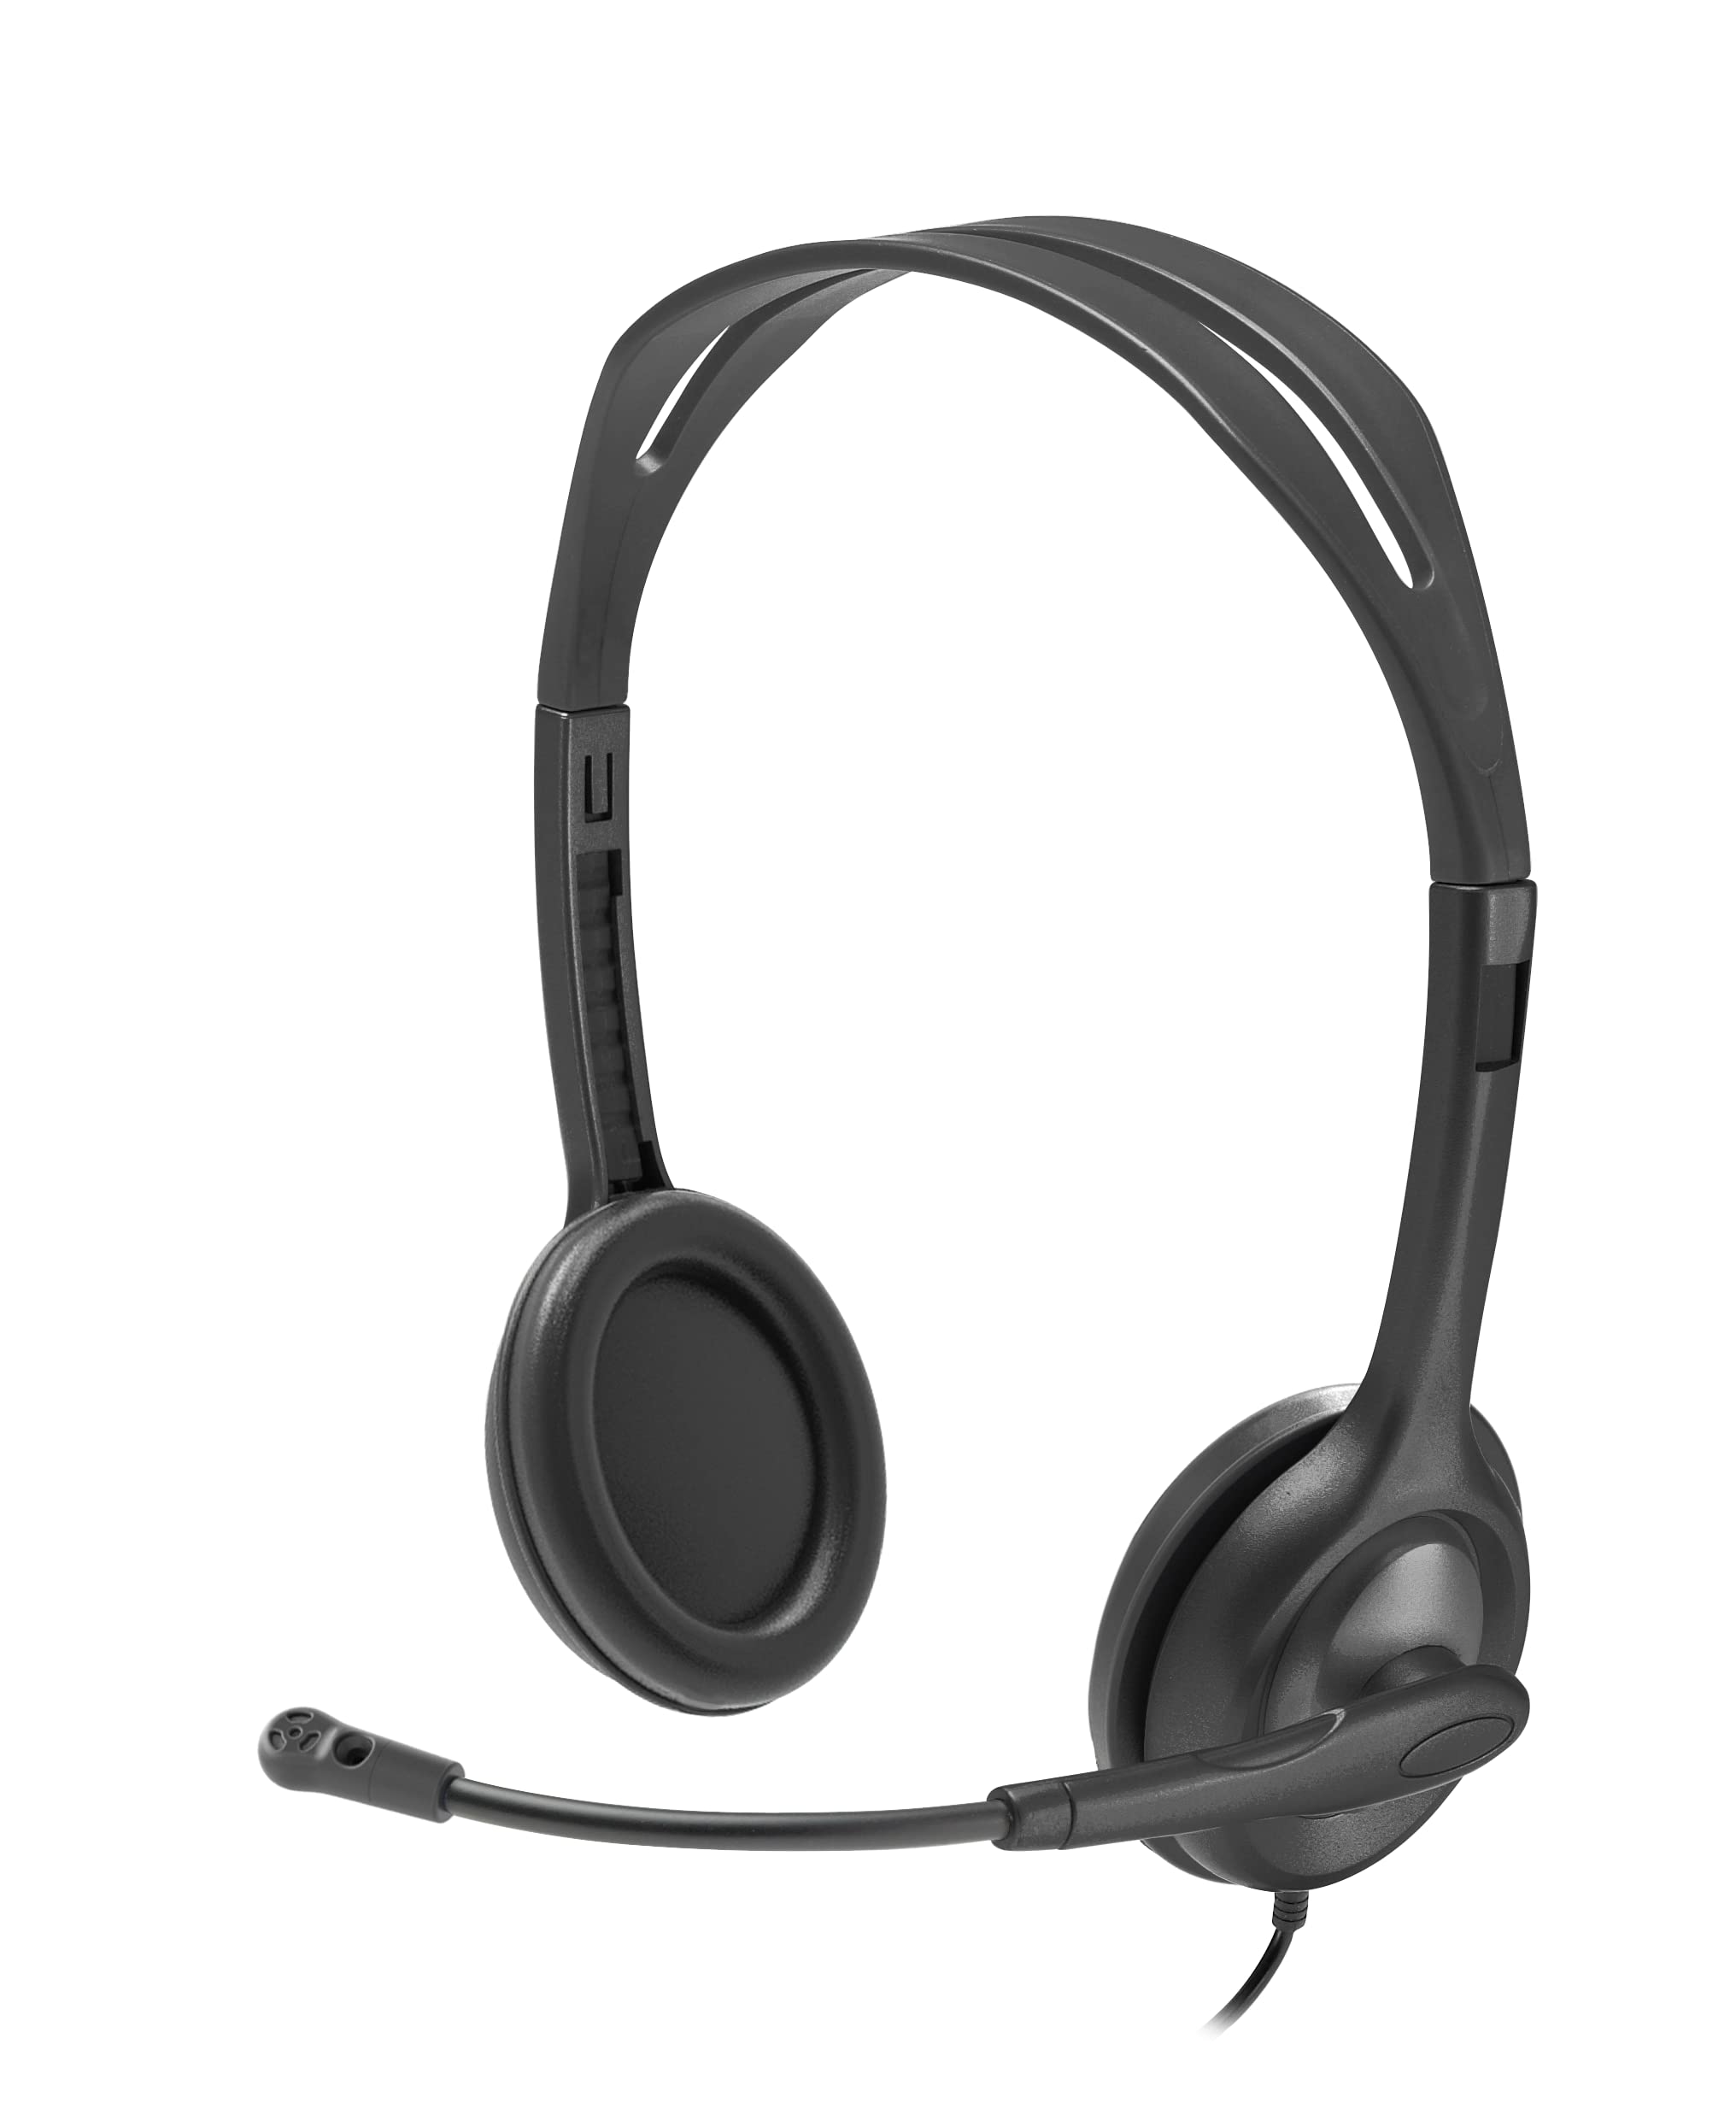 Logitech H111 Stereo Headset w/ 3.5 mm Audio Jack (Black) $9.75 + Free Shipping w/ Prime or on orders $35+